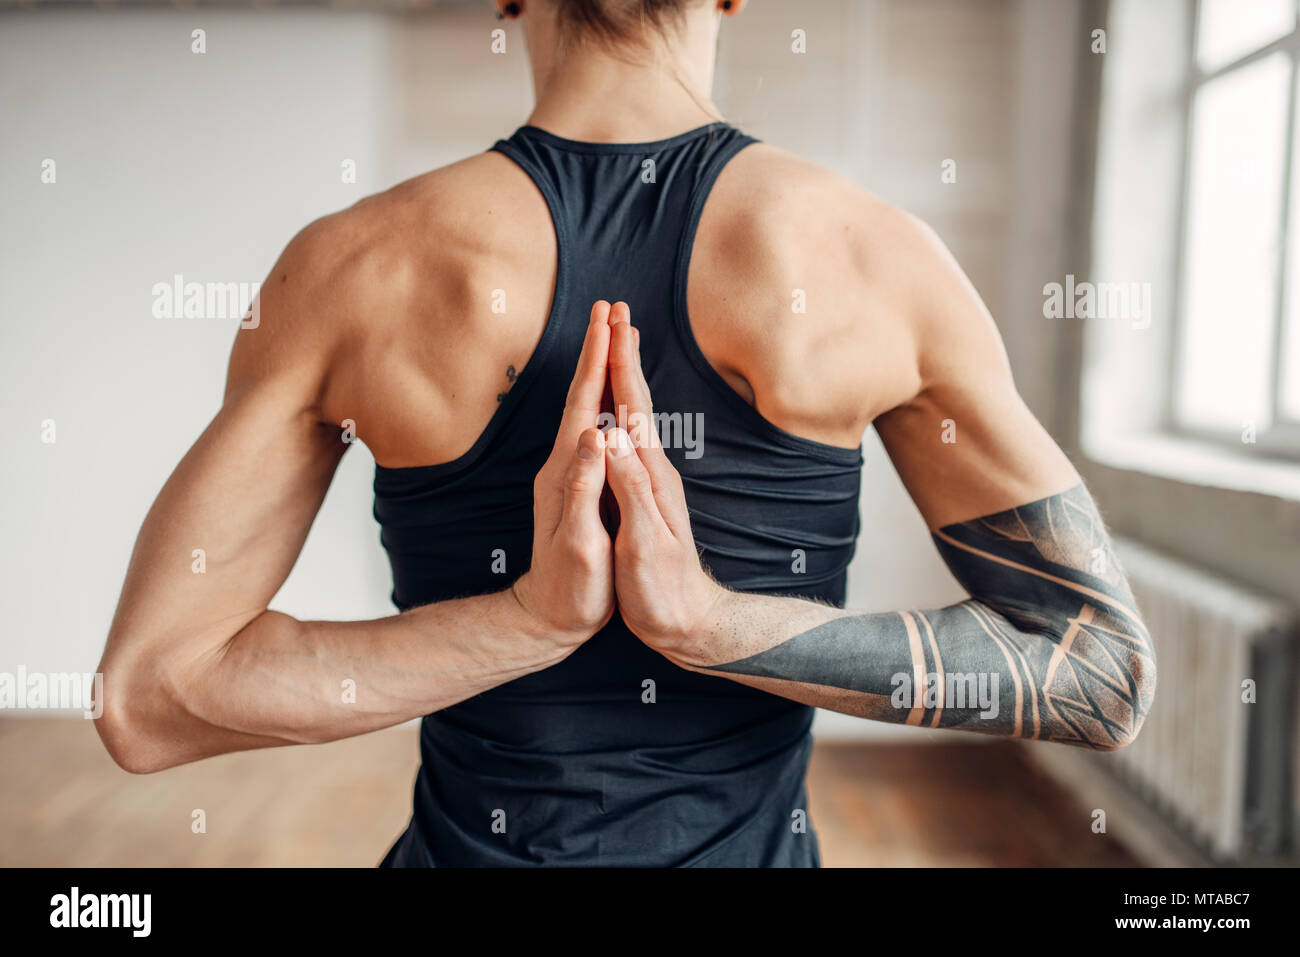 Male yoga on training, flexibility of human body. Balance exercise on mat  in gym with grunge interior. Fit workout indoors Stock Photo - Alamy